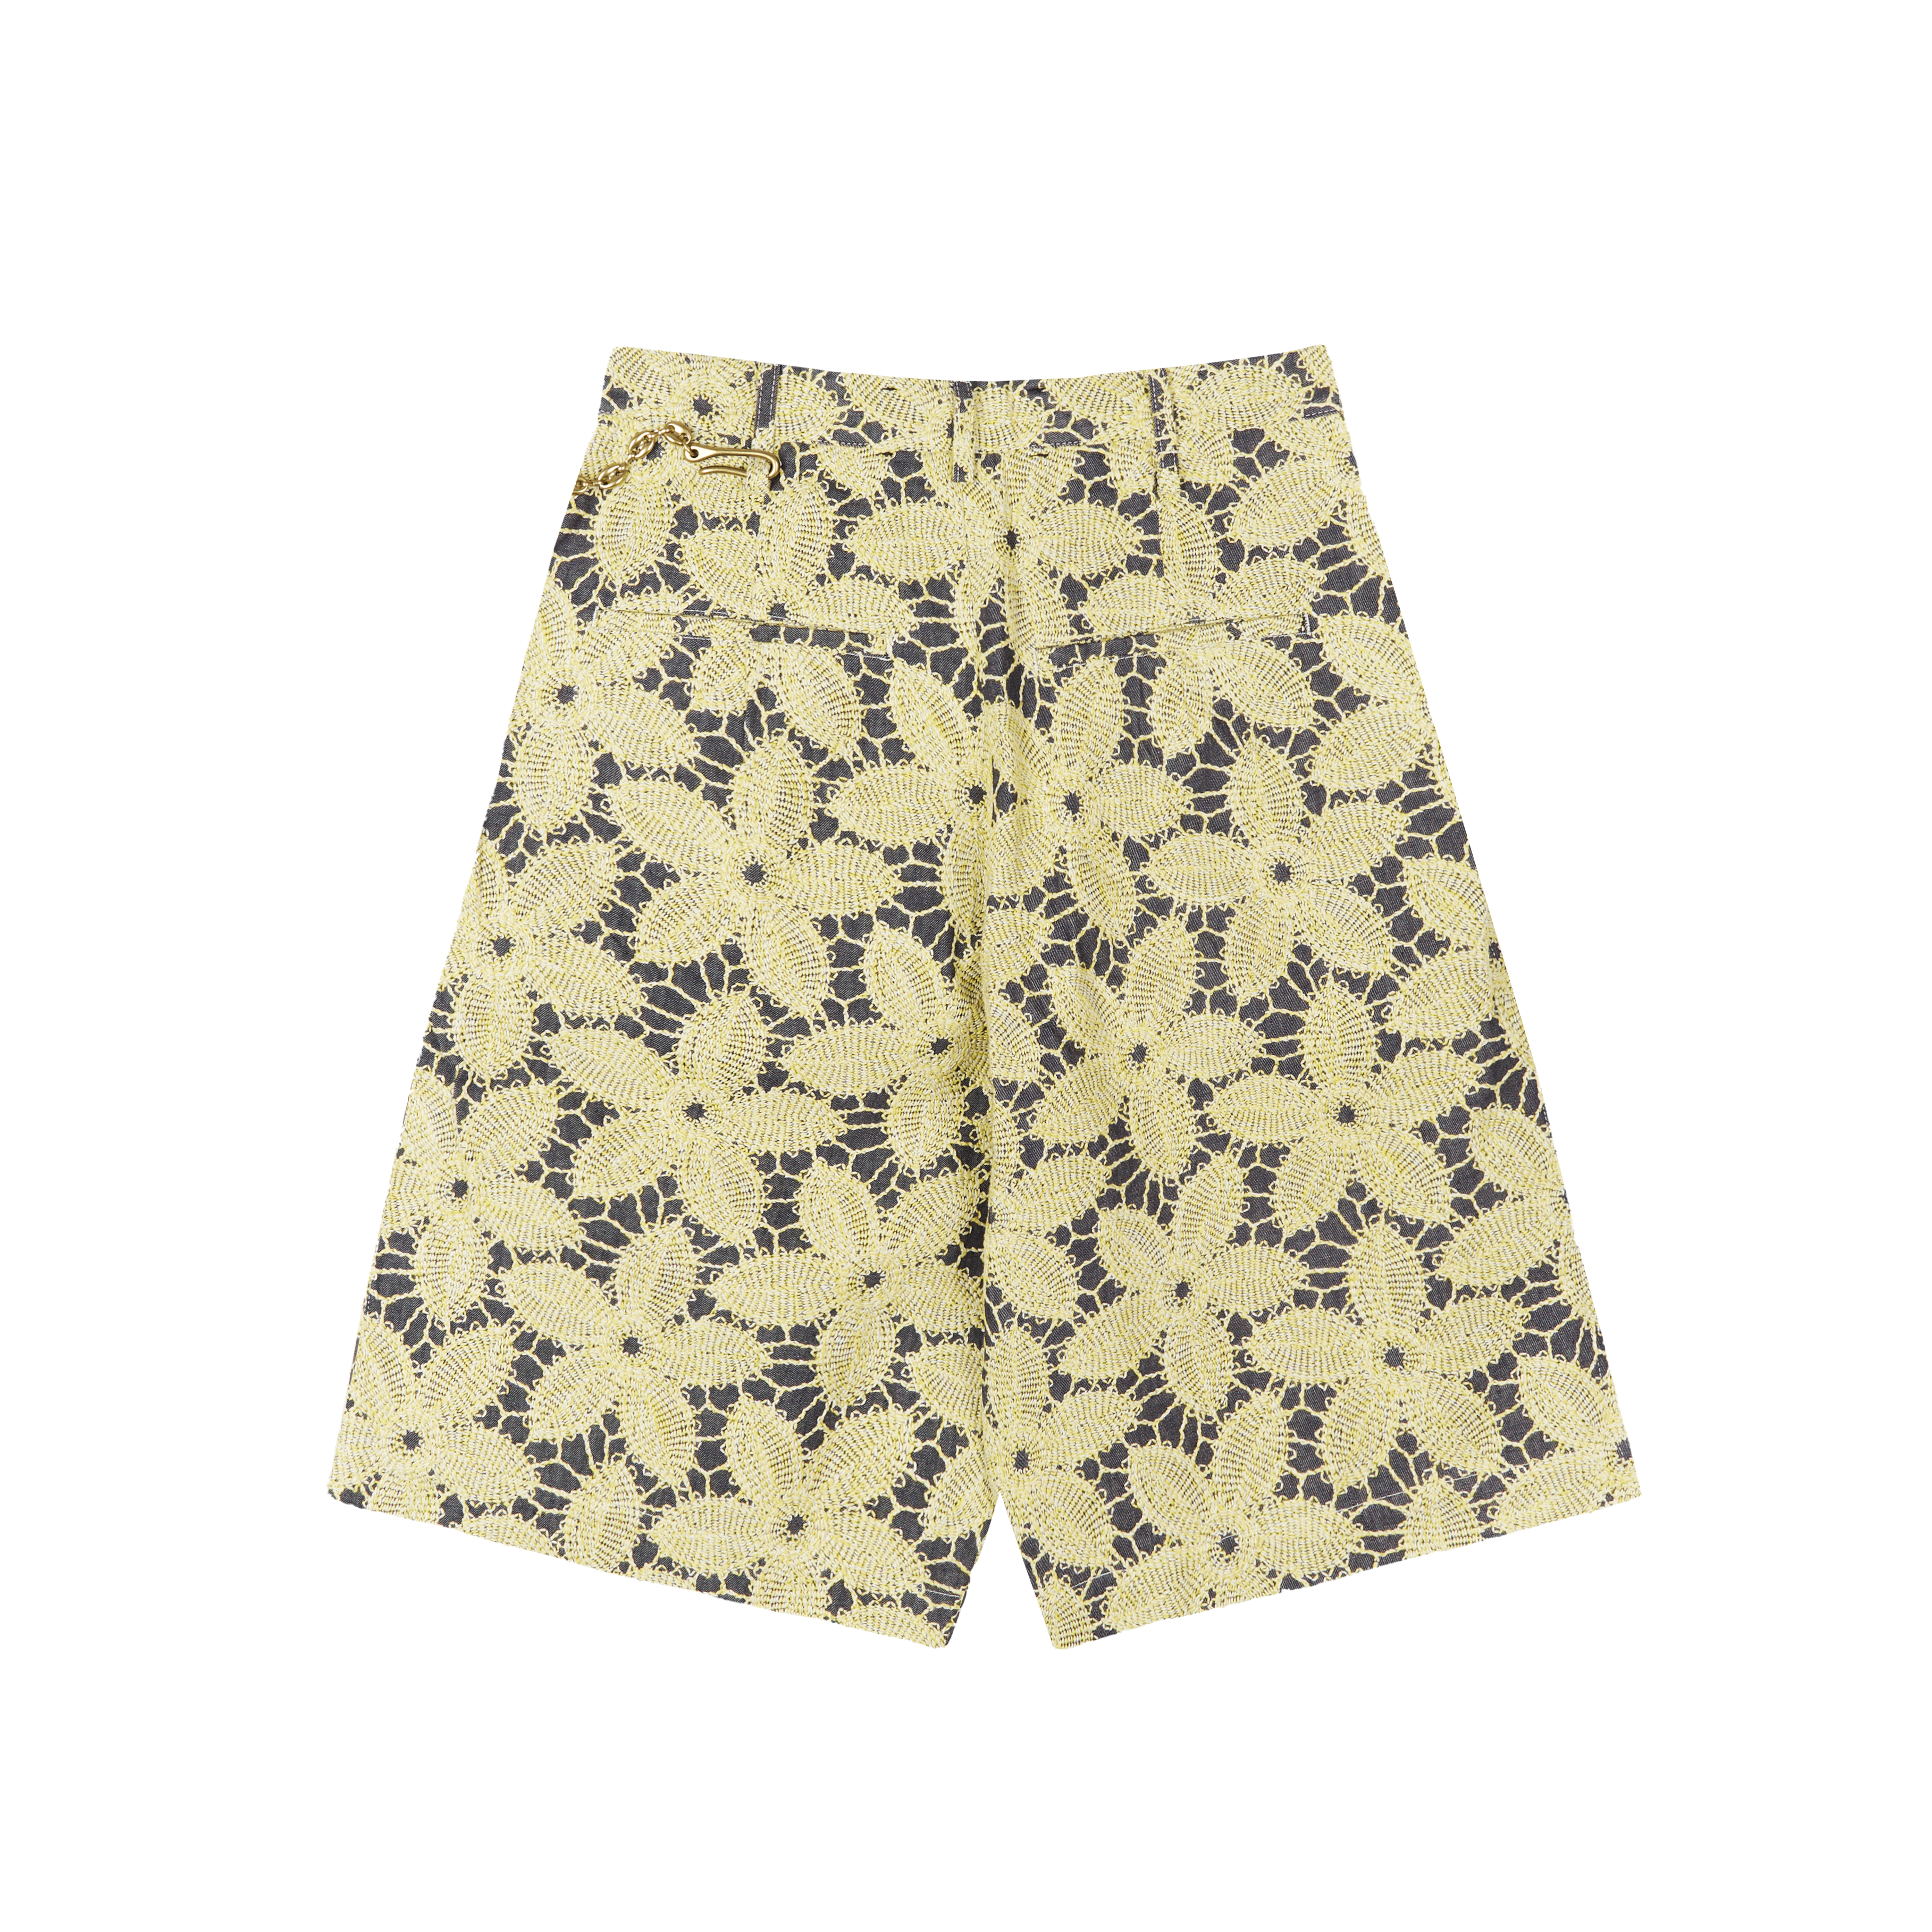 SONG FOR THE MUTE SINGLE PLEATED SHORTS WITH FLOWERS PATTERN Shorts Yellow